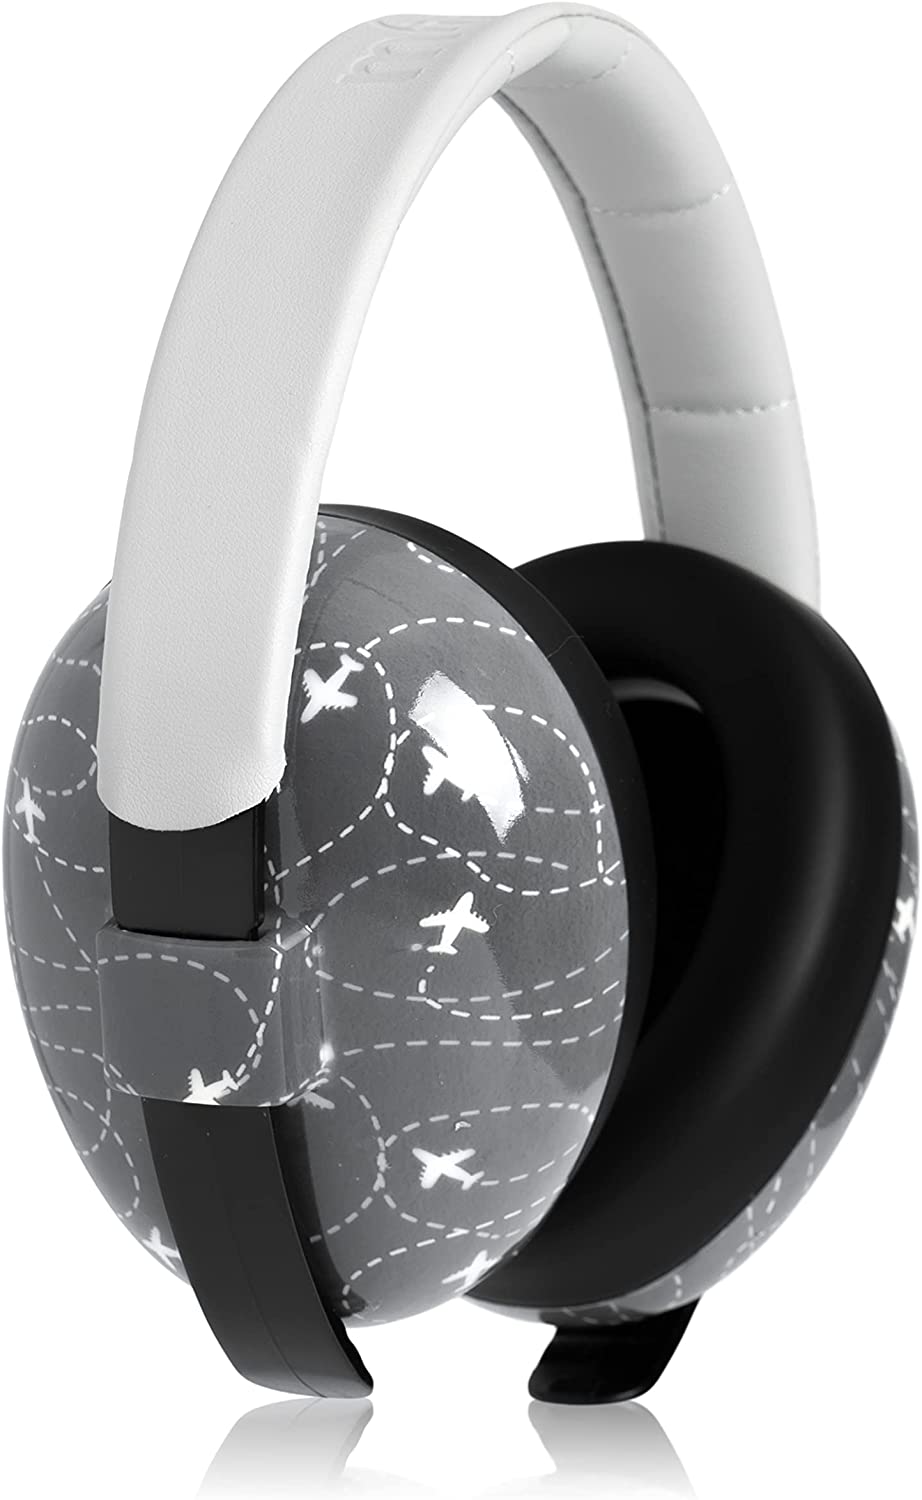 Baby Noise Cancelling Headphones